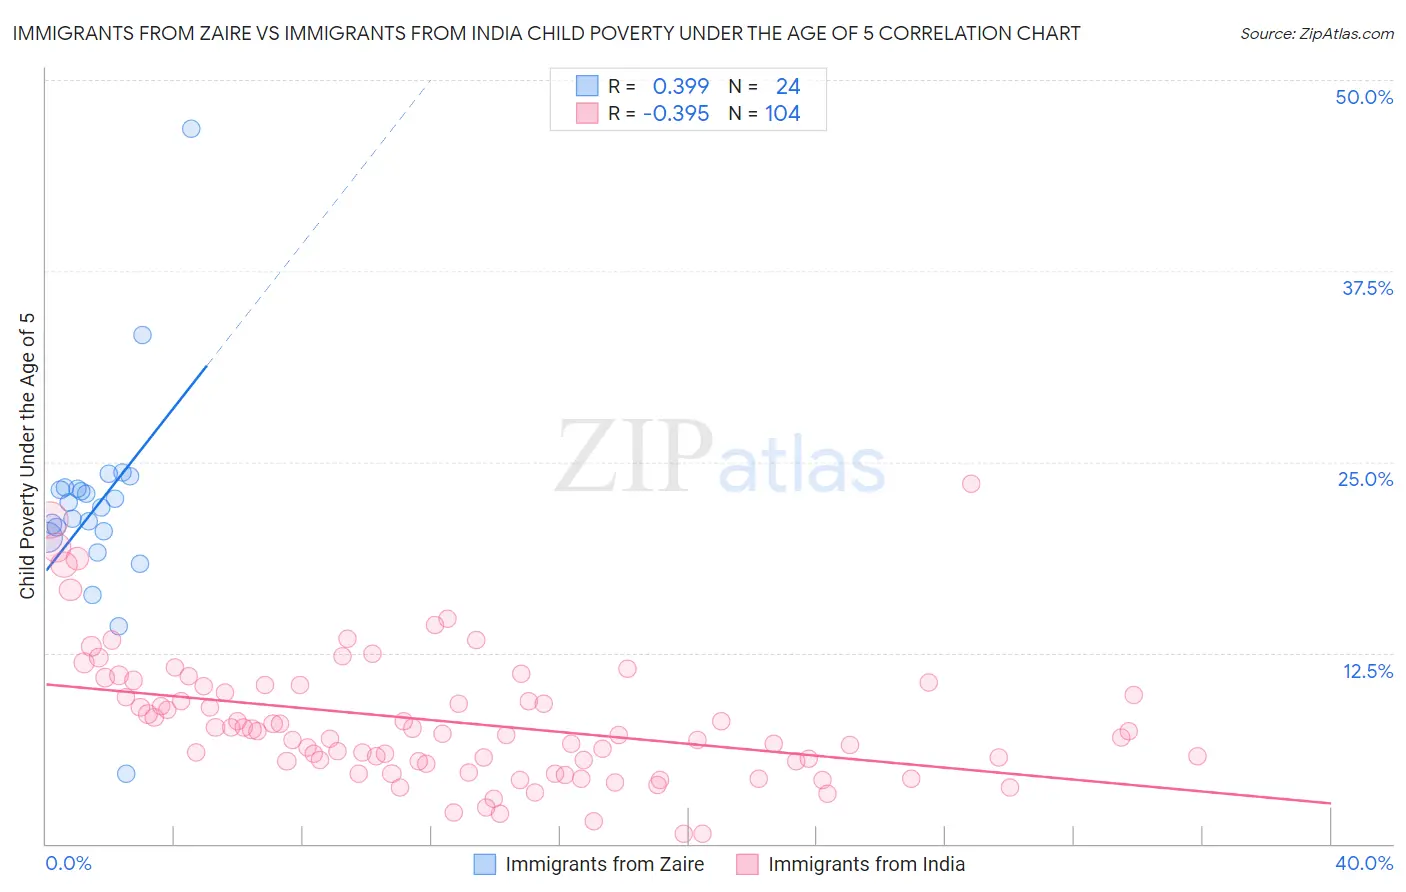 Immigrants from Zaire vs Immigrants from India Child Poverty Under the Age of 5